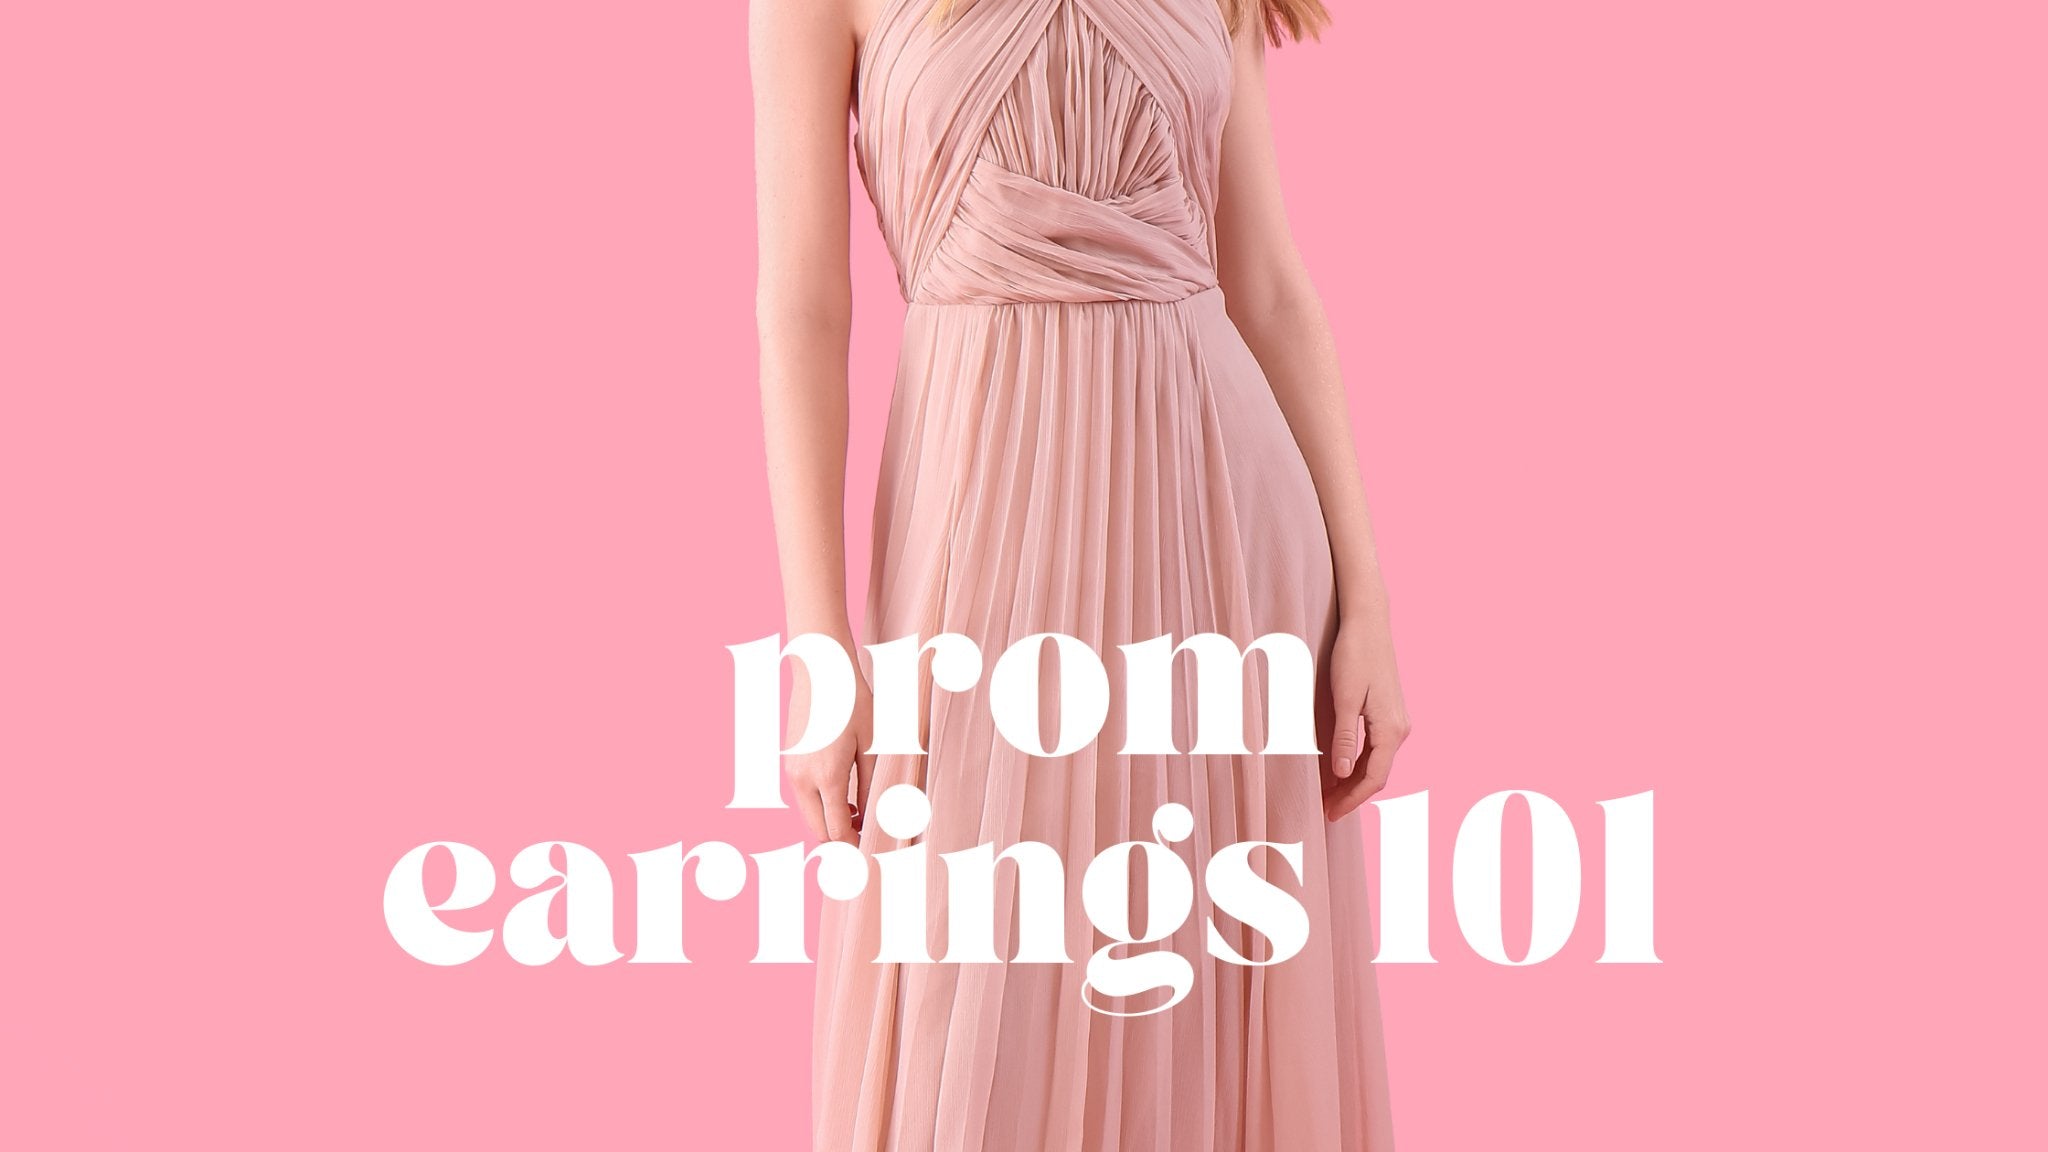 How to choose the perfect prom earrings for your dress - Smoothie London